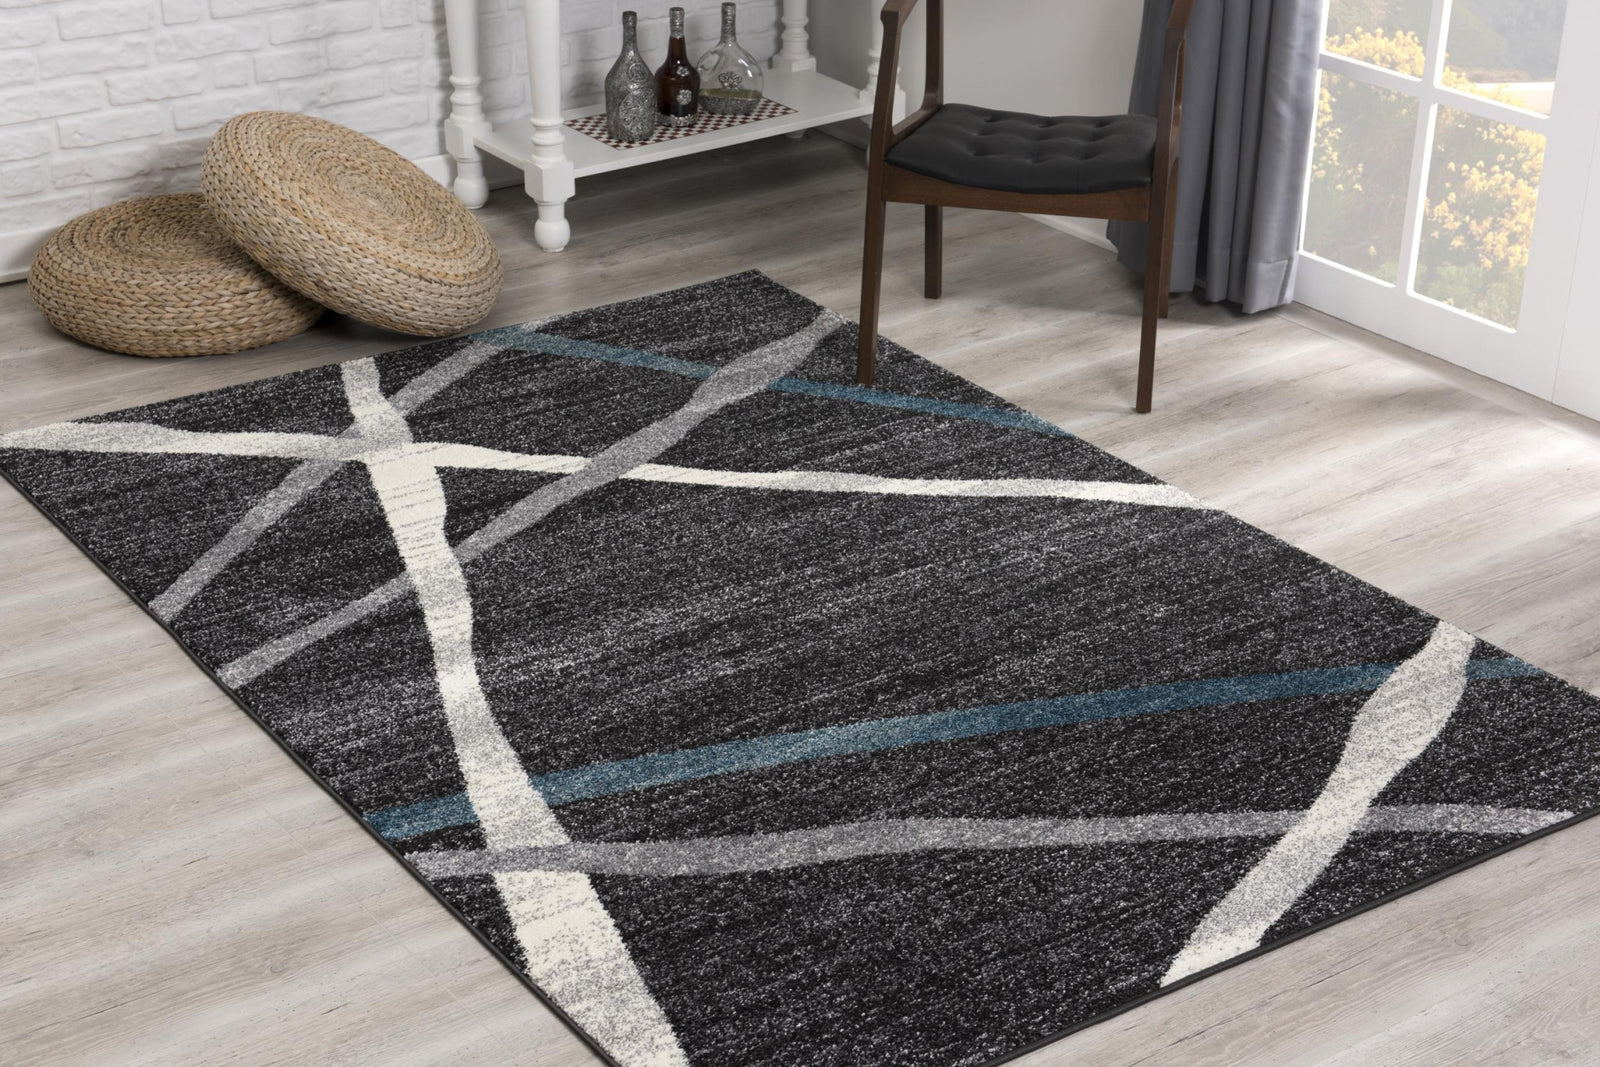 4’ X 6’ Distressed Black And Gray Abstract Area Rug